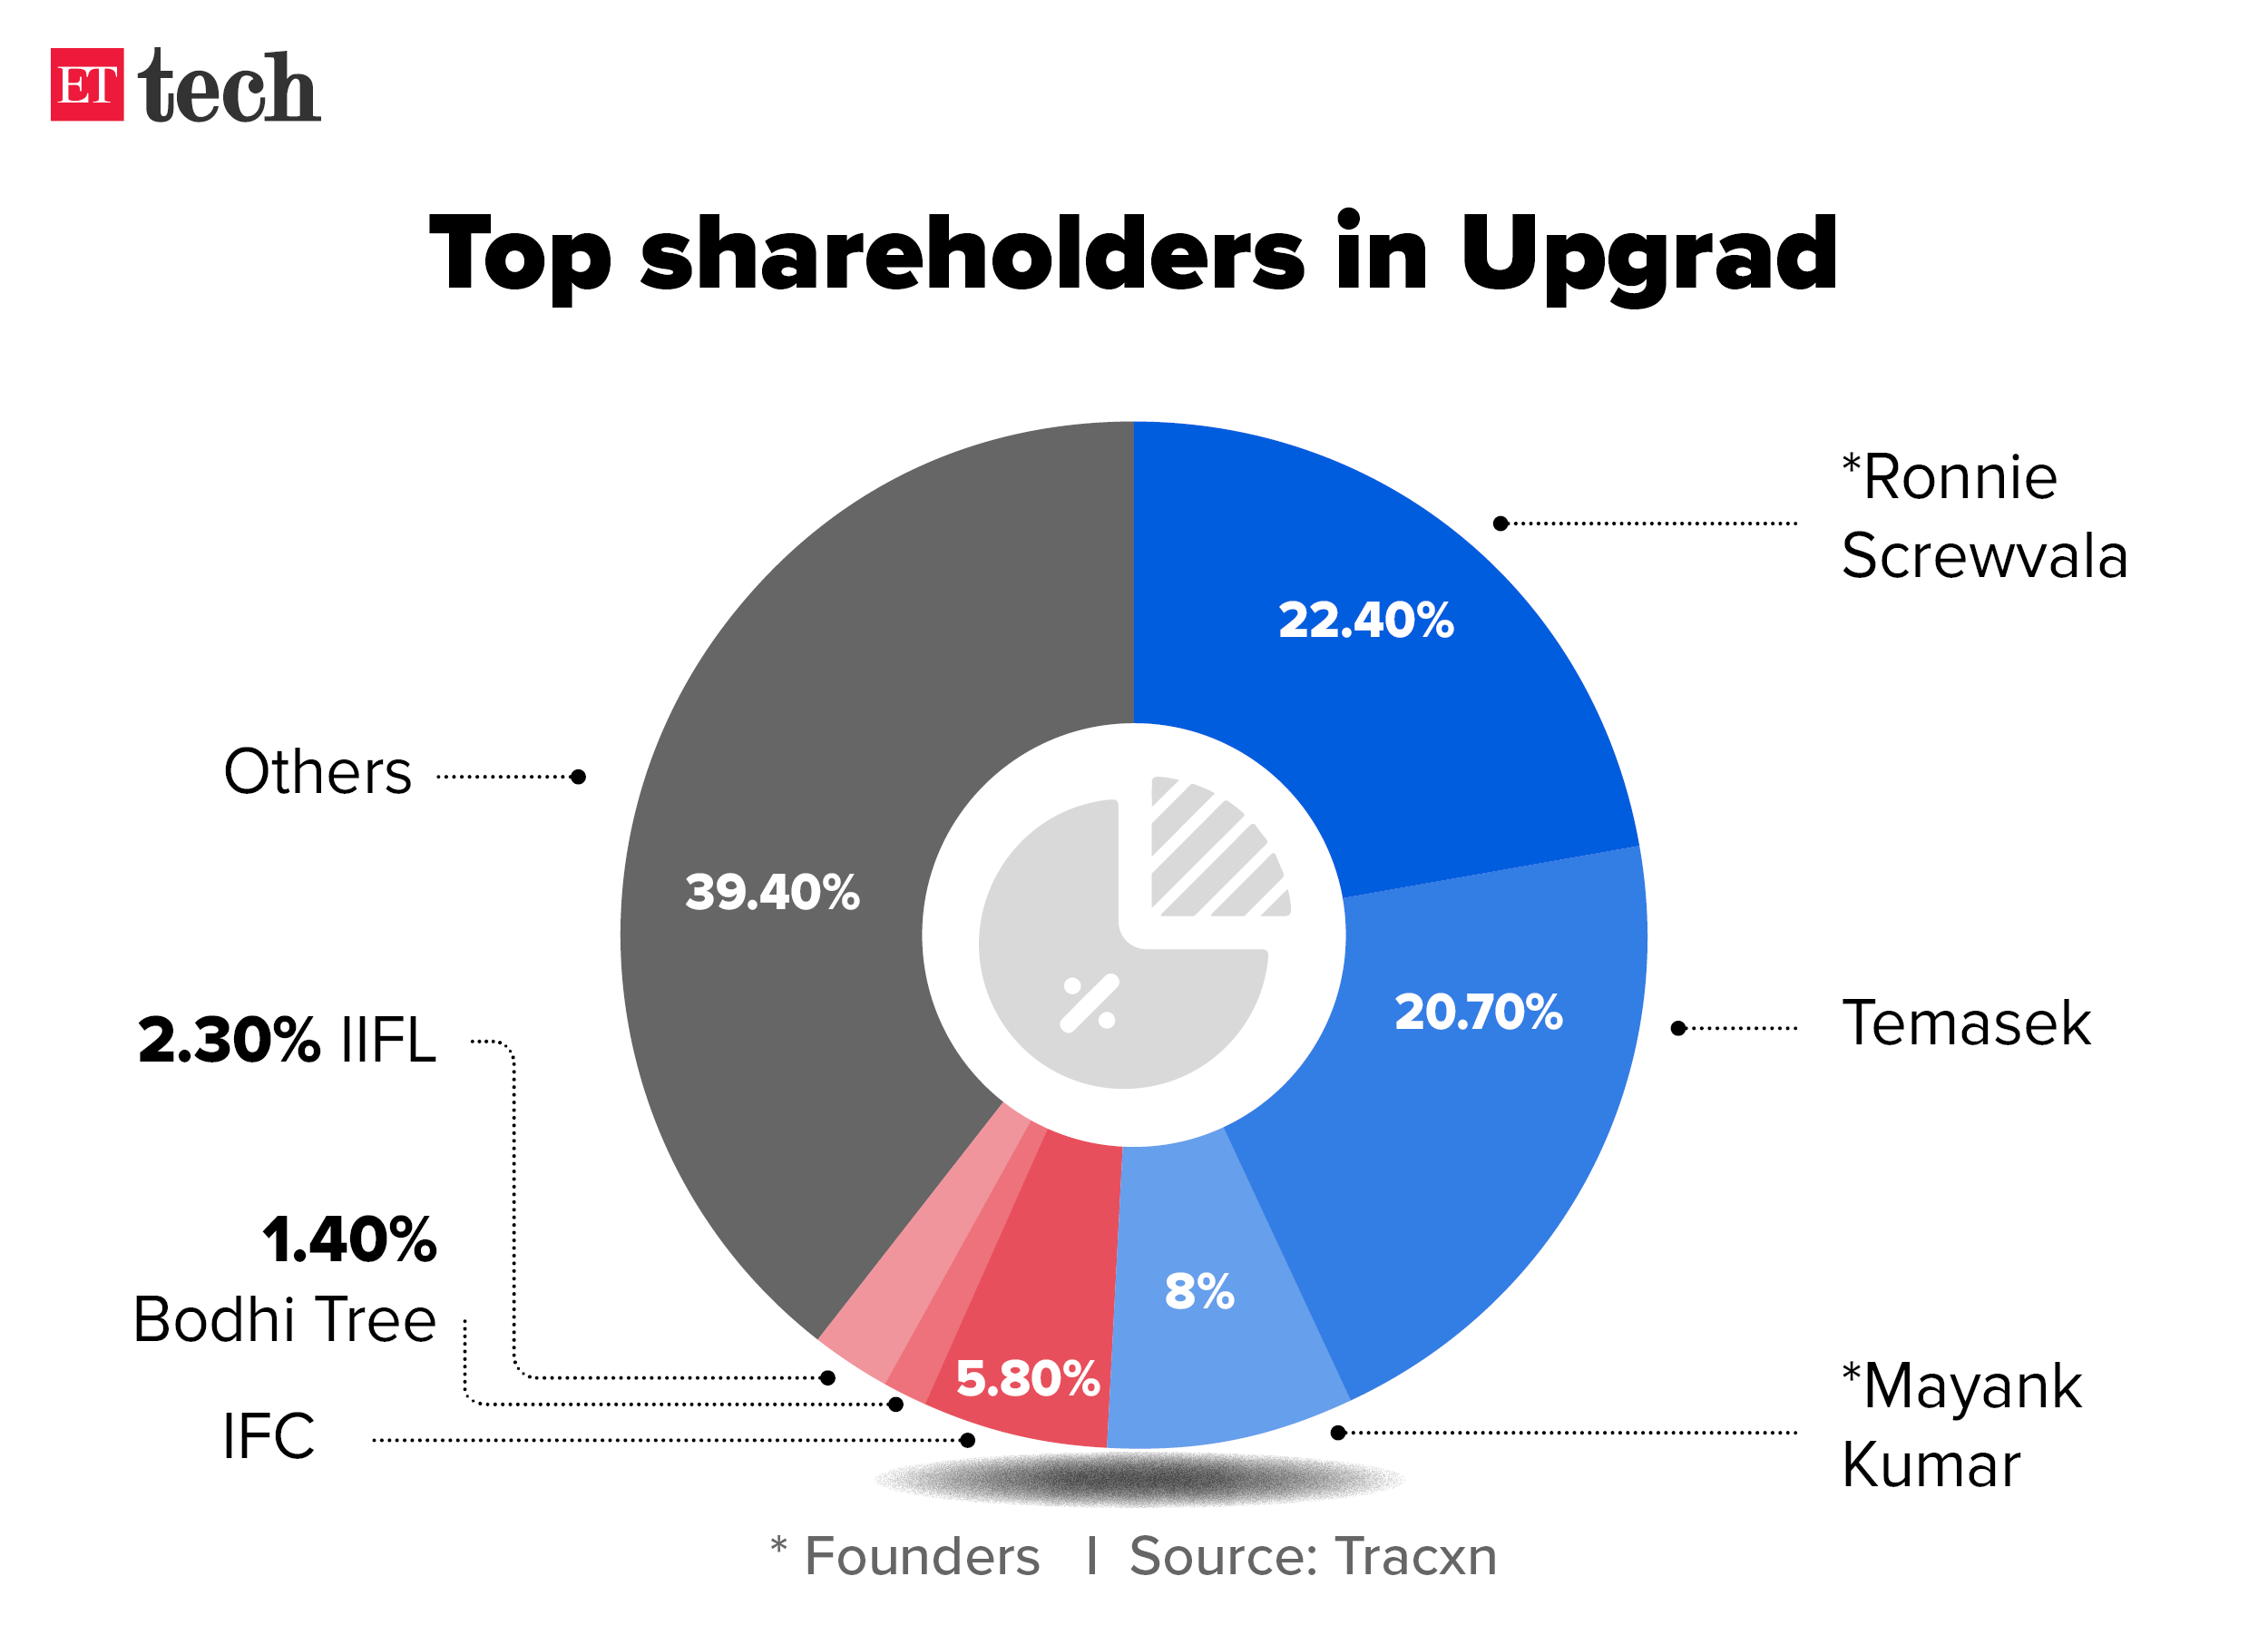 Top shareholders in Upgrad Graphic ETTECH